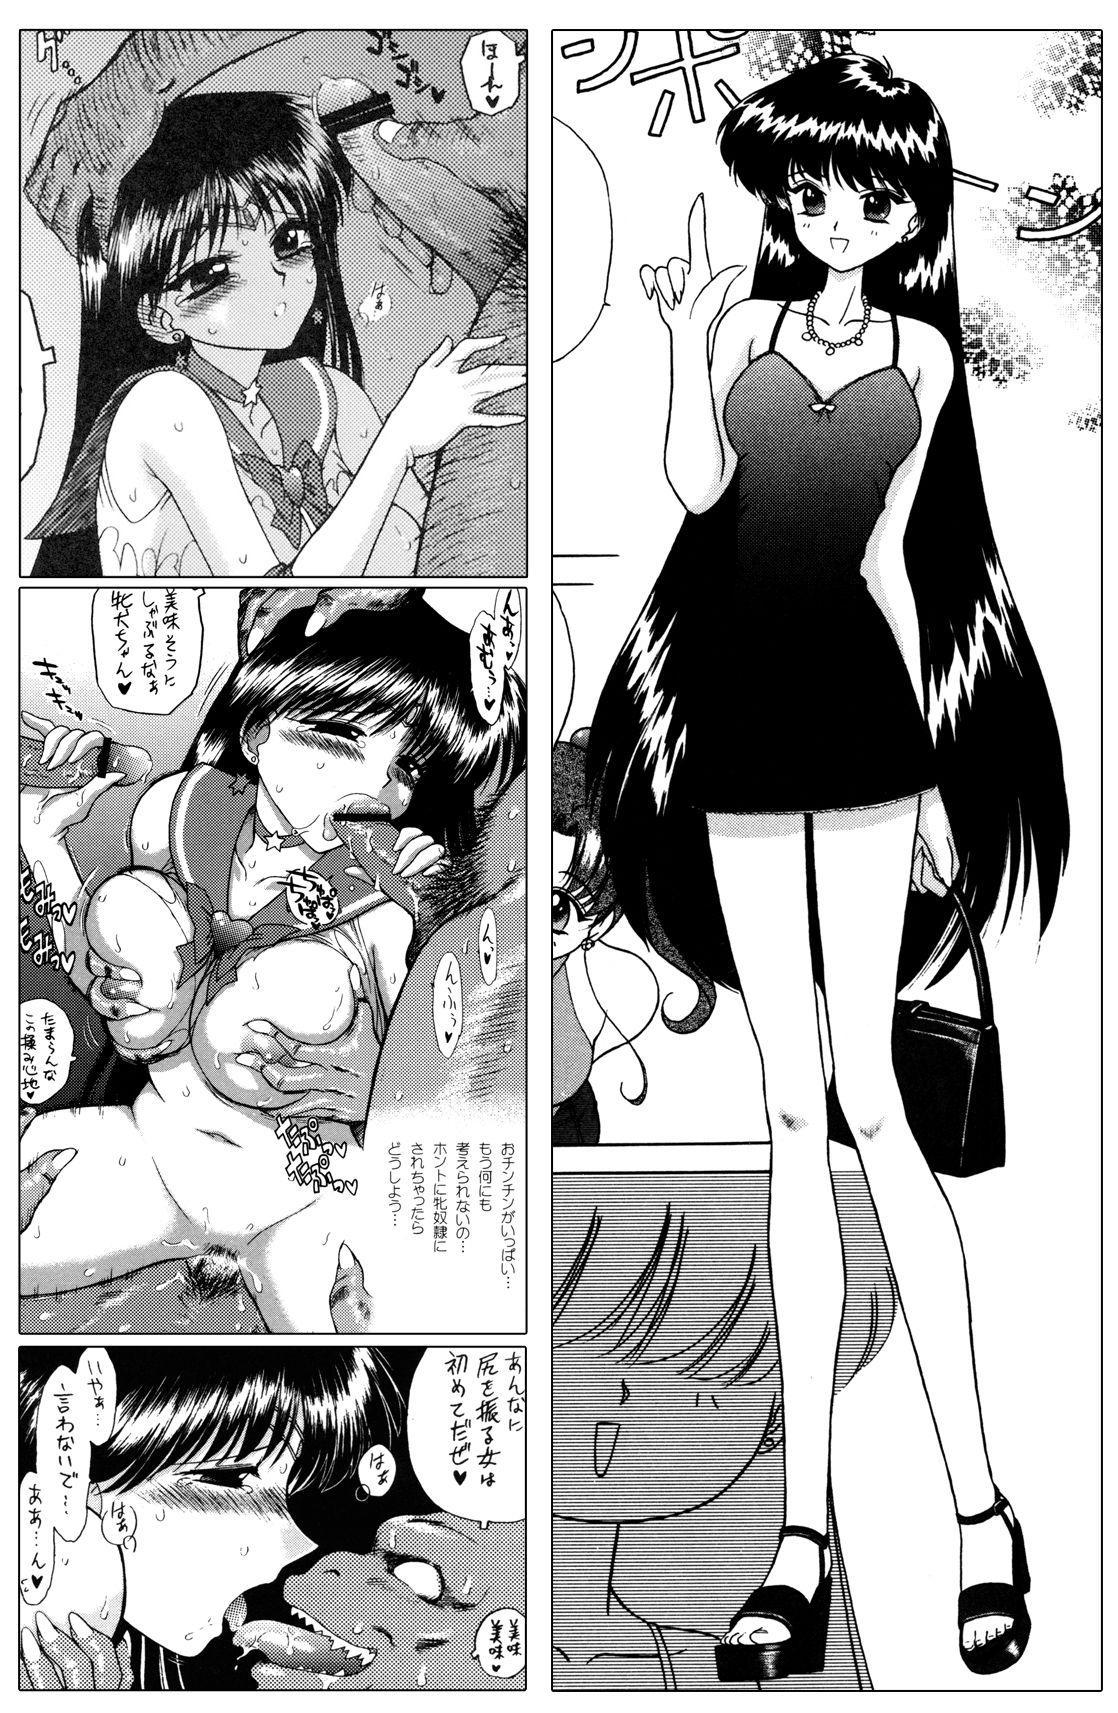 Rough QUEEN OF SPADES - 黑桃皇后 - Sailor moon Eating Pussy - Page 12